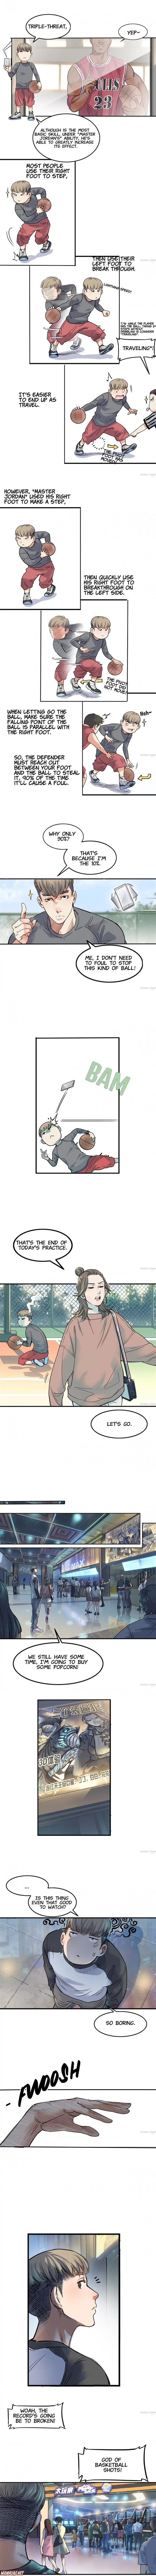 Streetball in the Hood Chapter 9 - Page 2